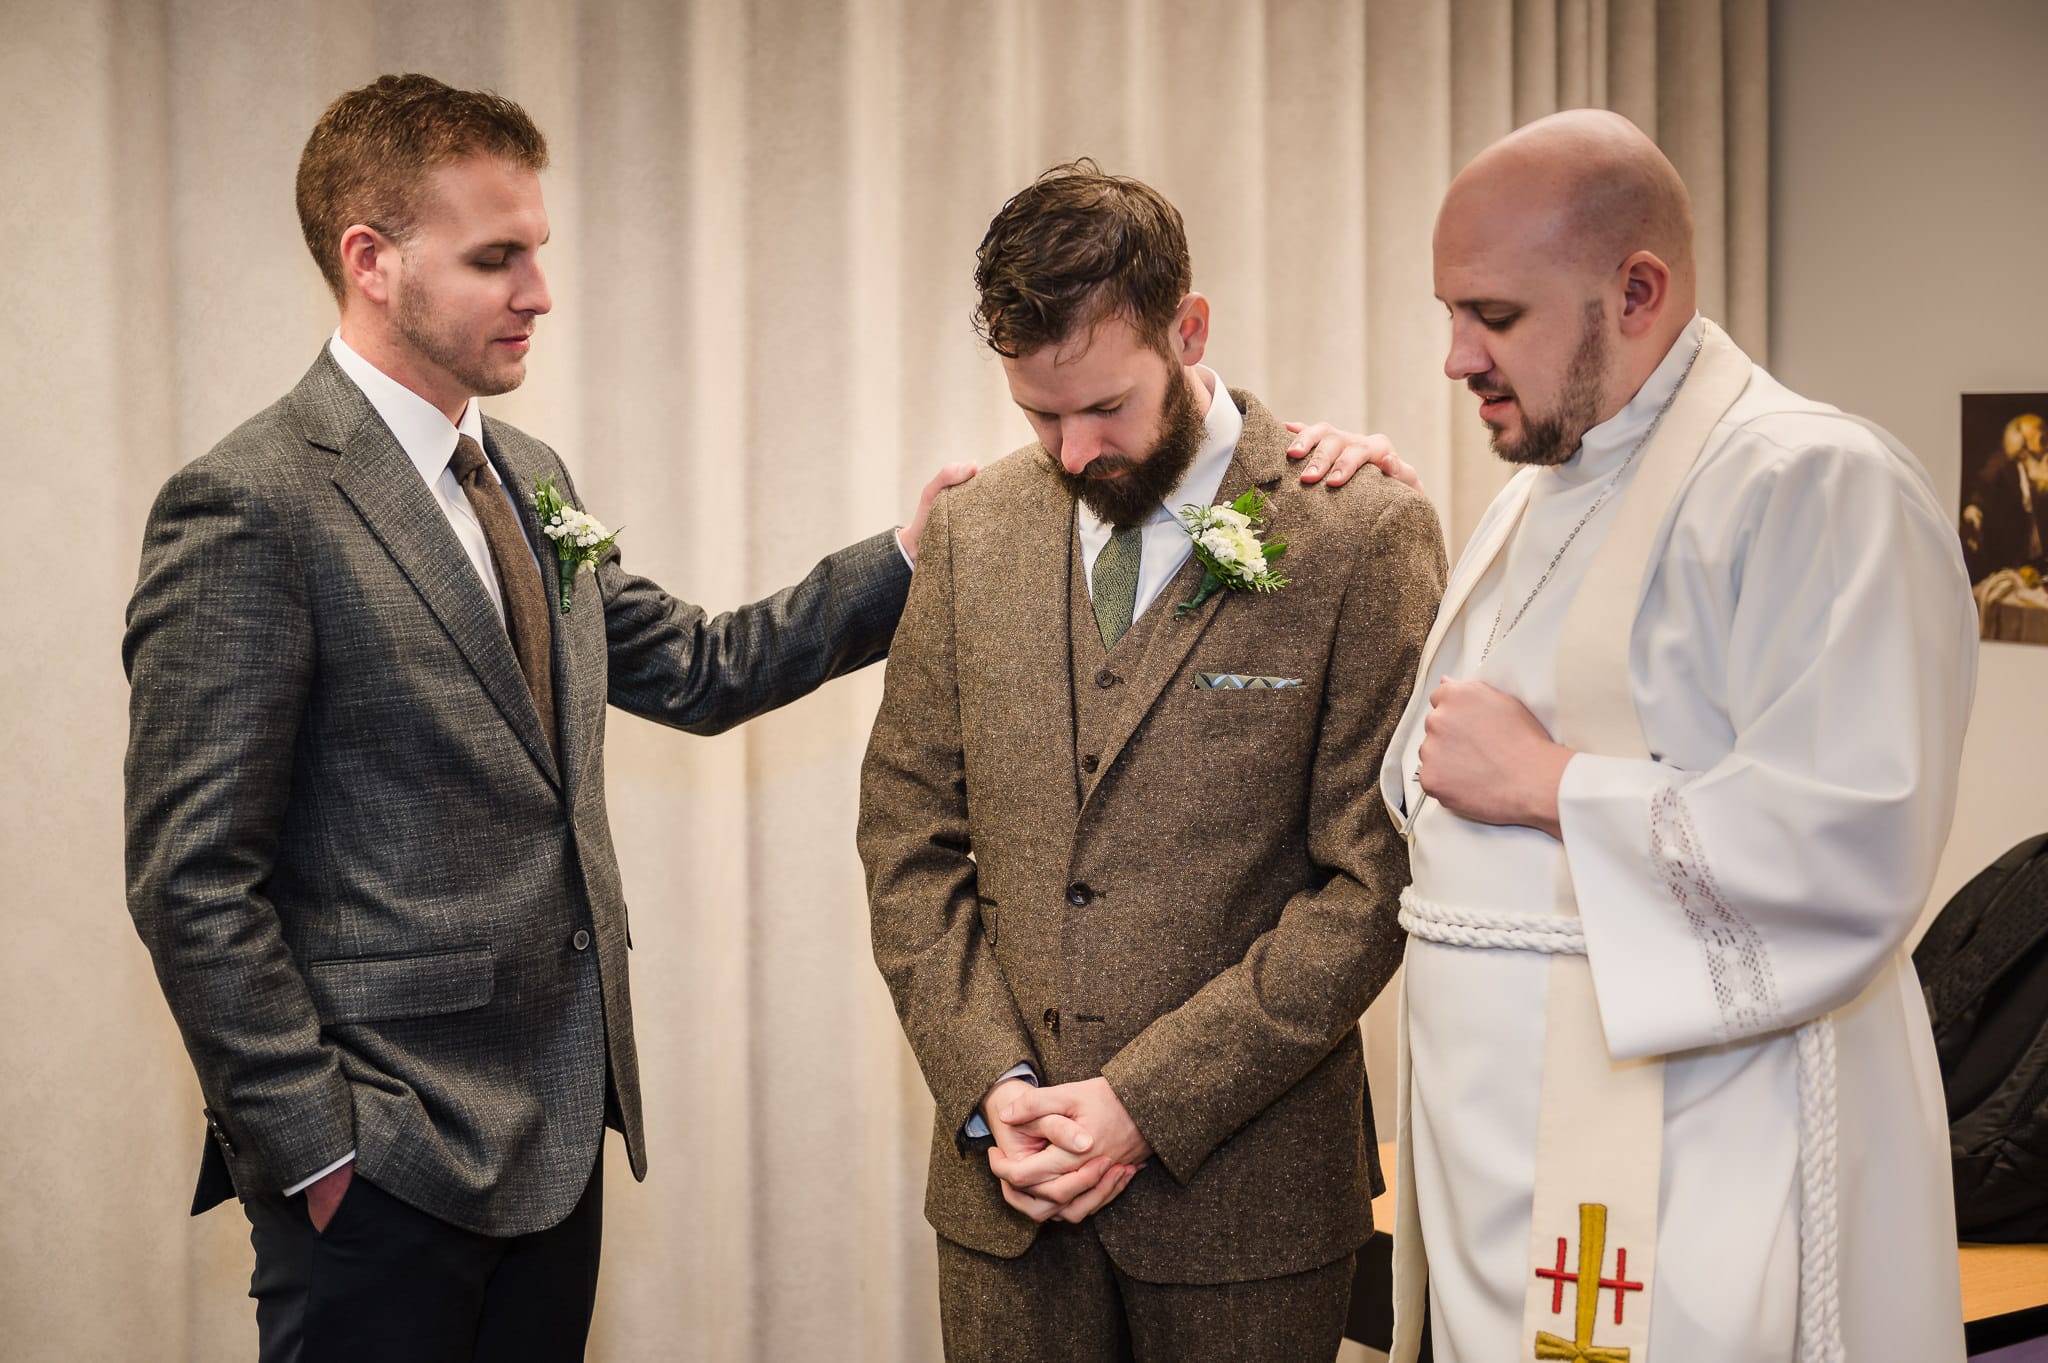 A prayerful moment before the ceremony with the best man, groom, and the officiant.